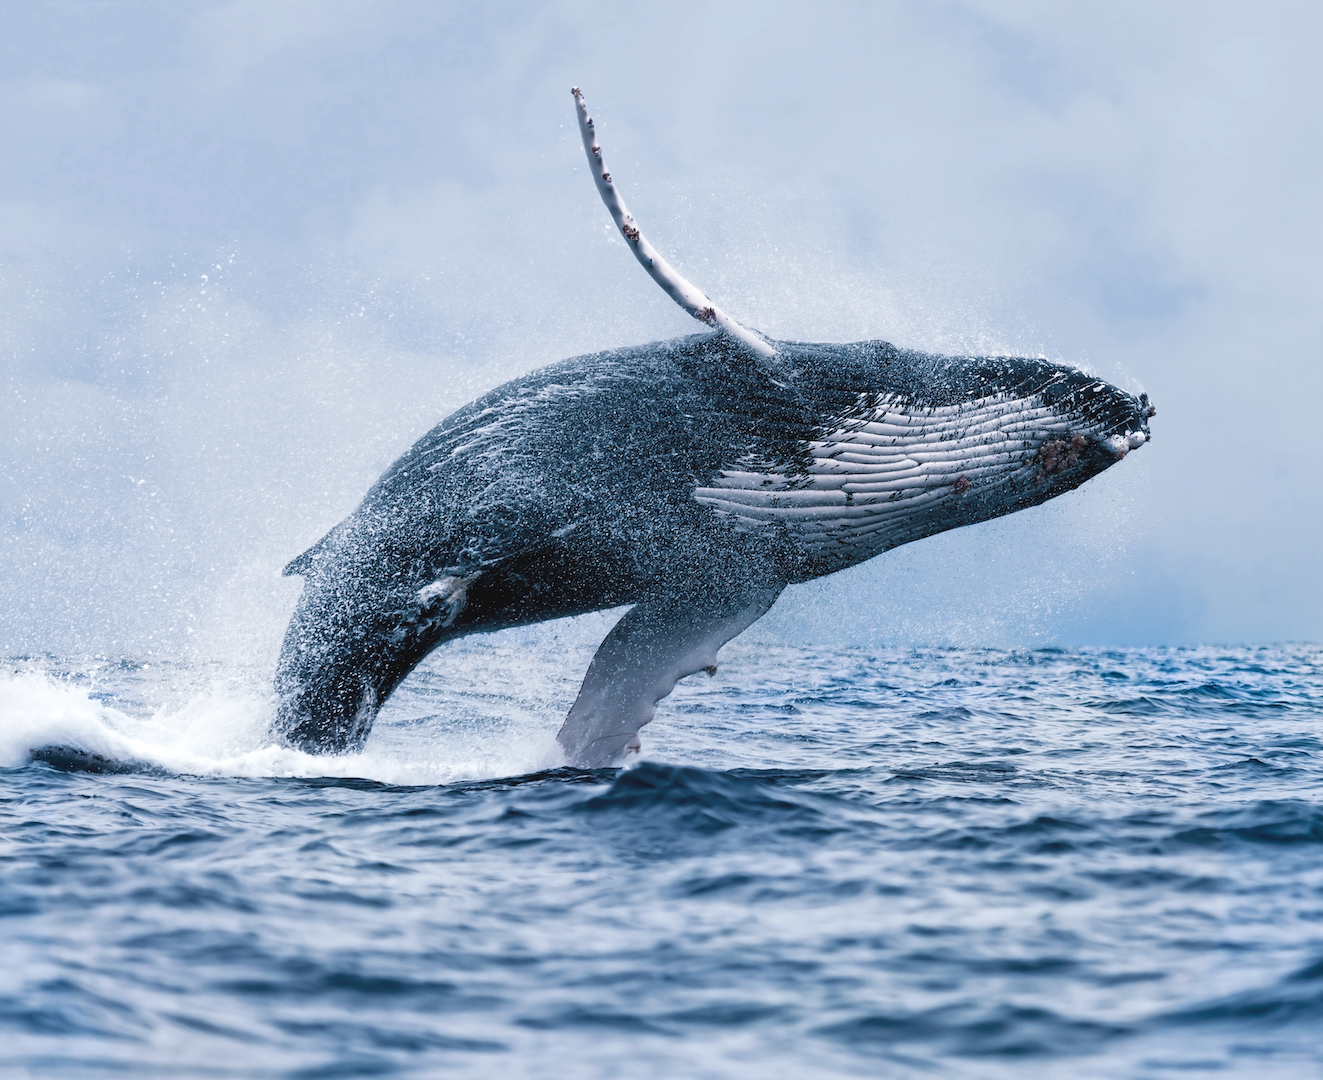 On the Best Value Whale Watching Trip from Reykjavik you might see the giant humpback whale breaching in a stunning acrobatic display.